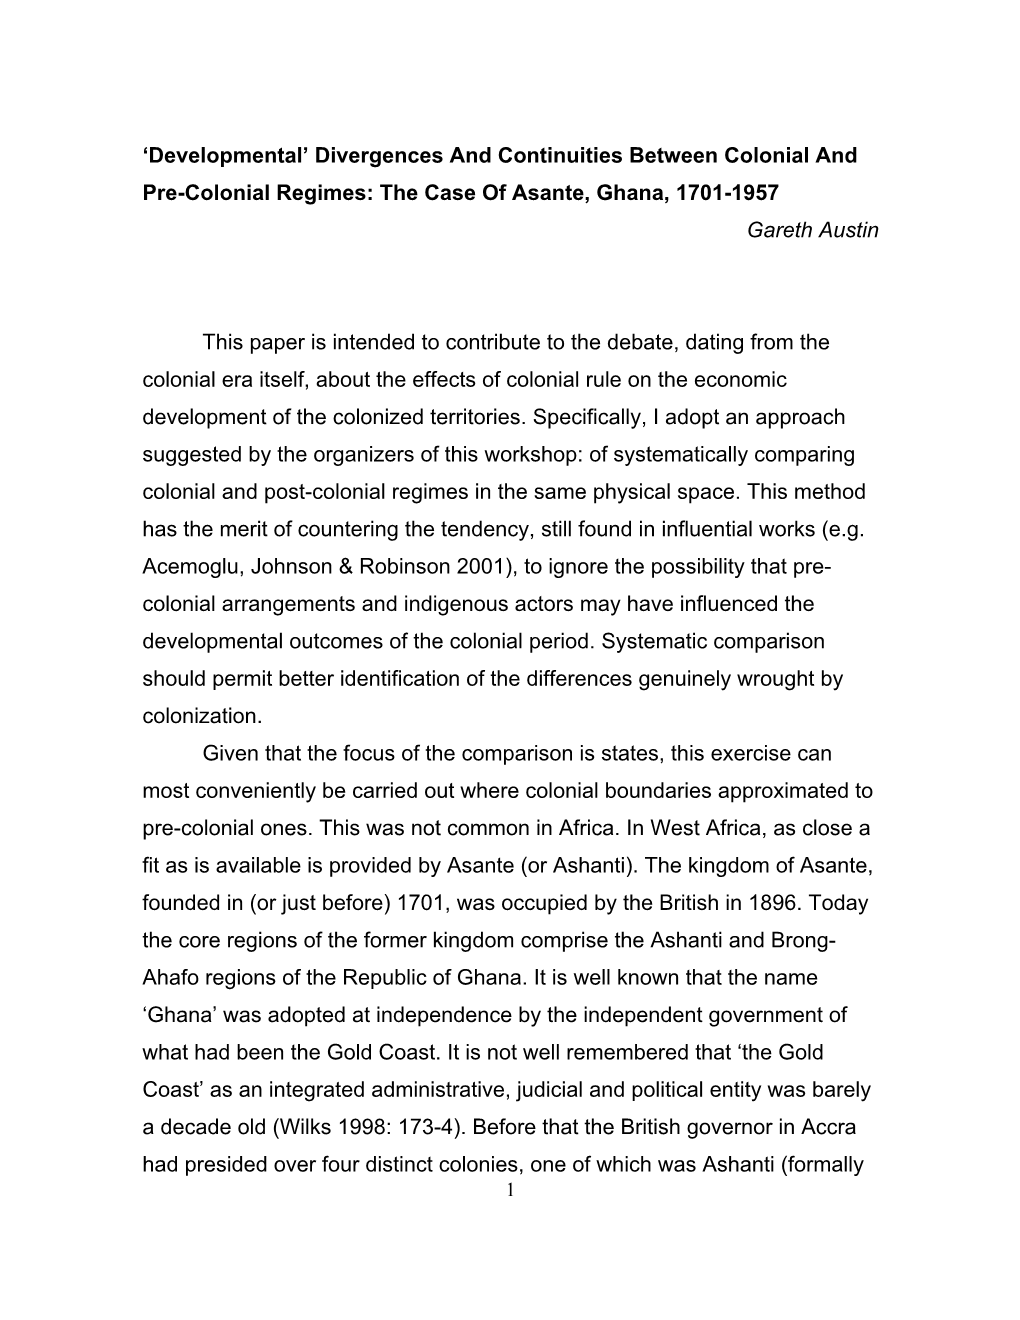 Divergences and Continuities Between Colonial and Pre-Colonial Regimes: the Case of Asante, Ghana, 1701-1957 Gareth Austin